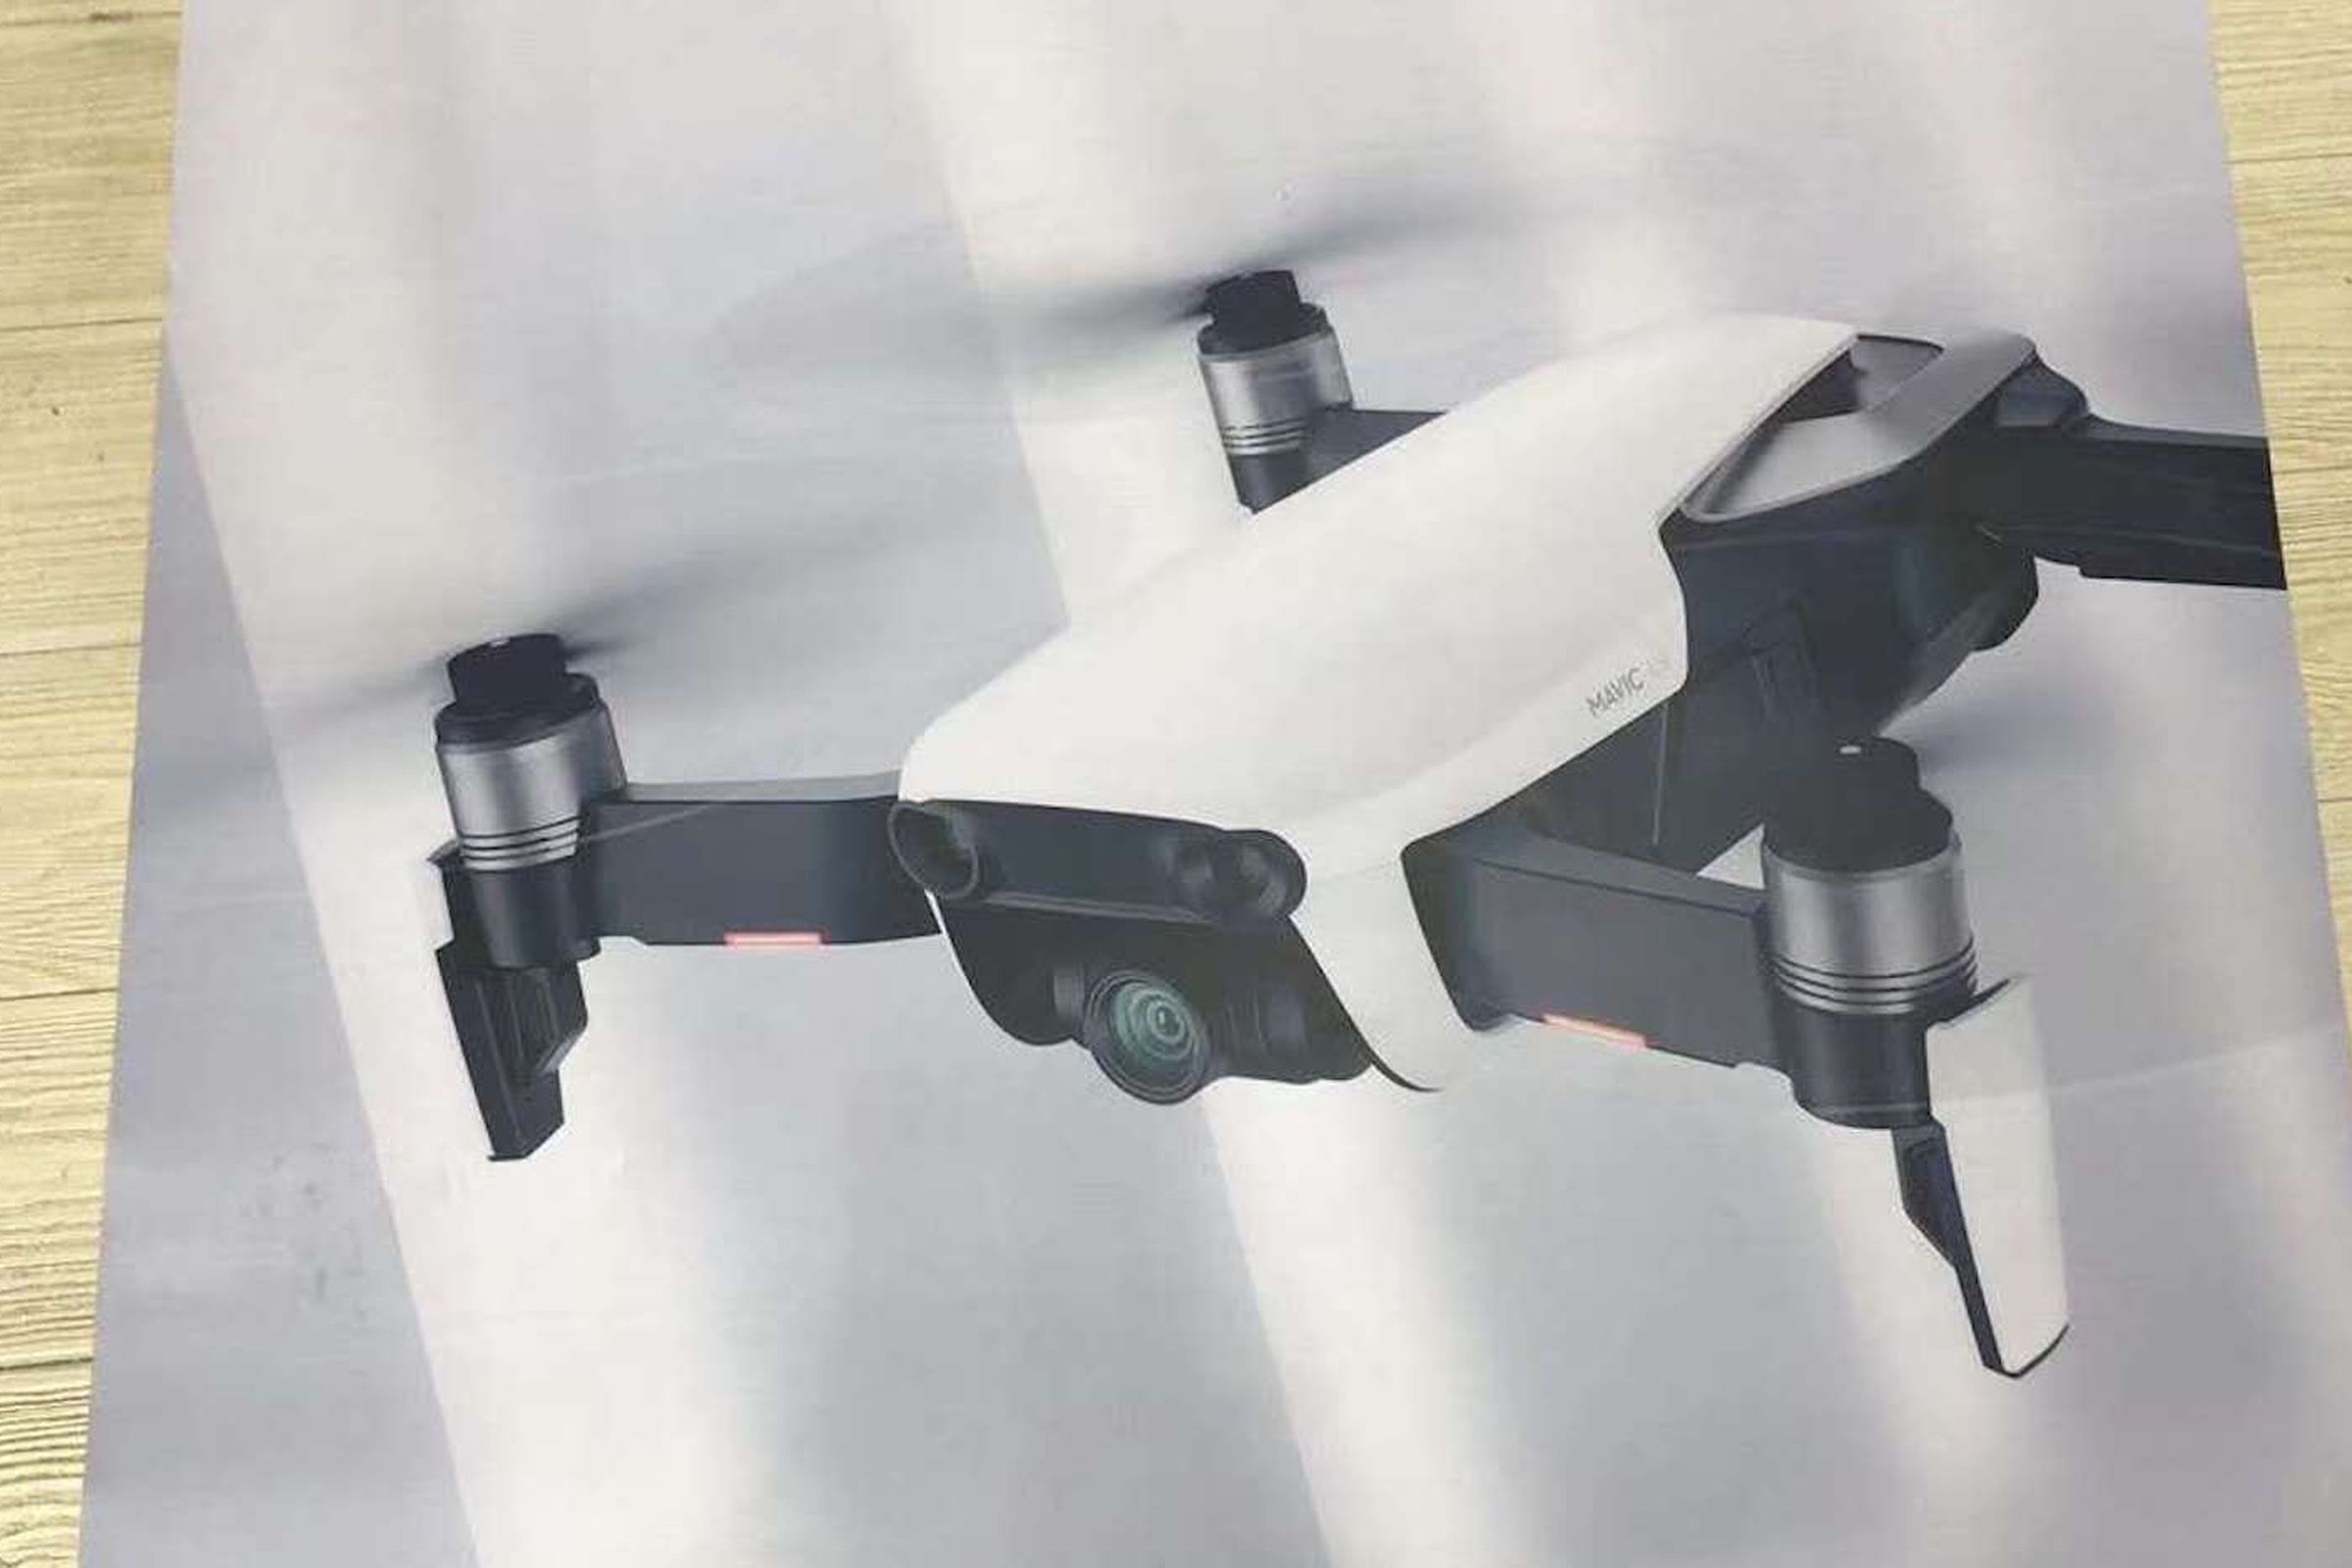 Leaked image purportedly showing the Mavic Air.